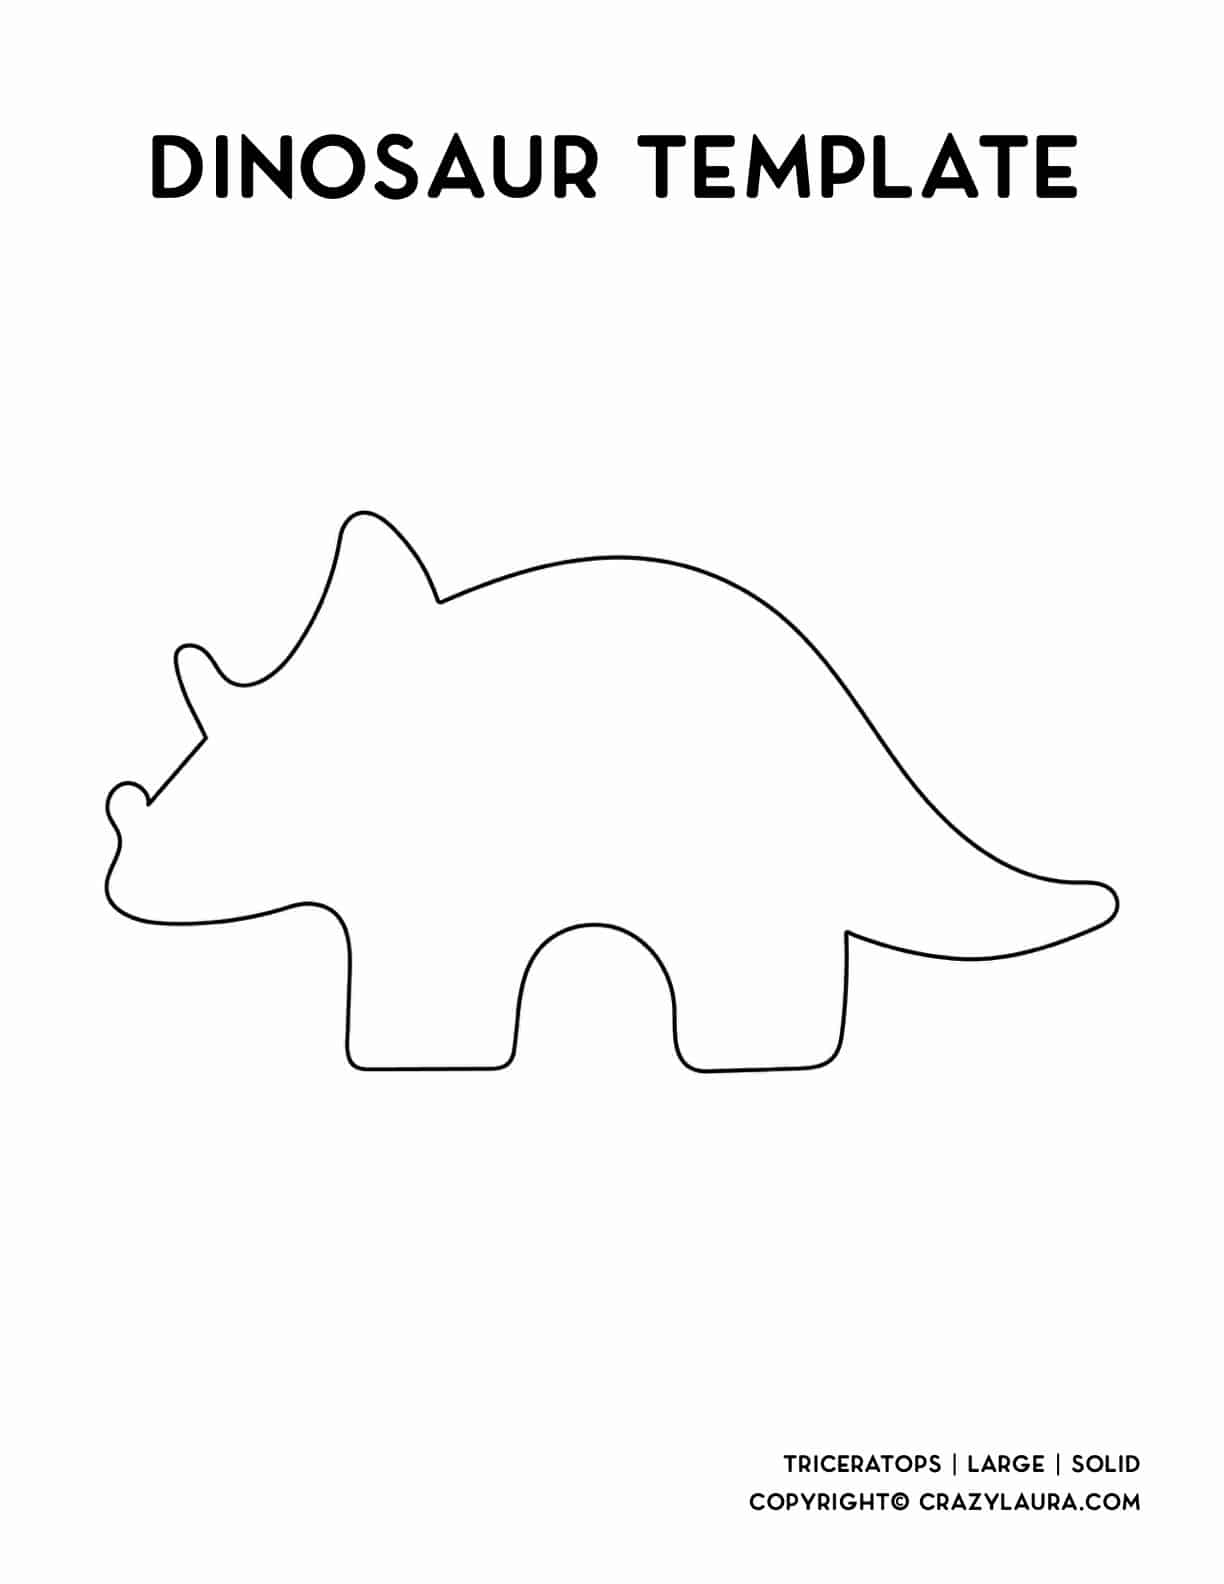 large triceratops outline for print and cut